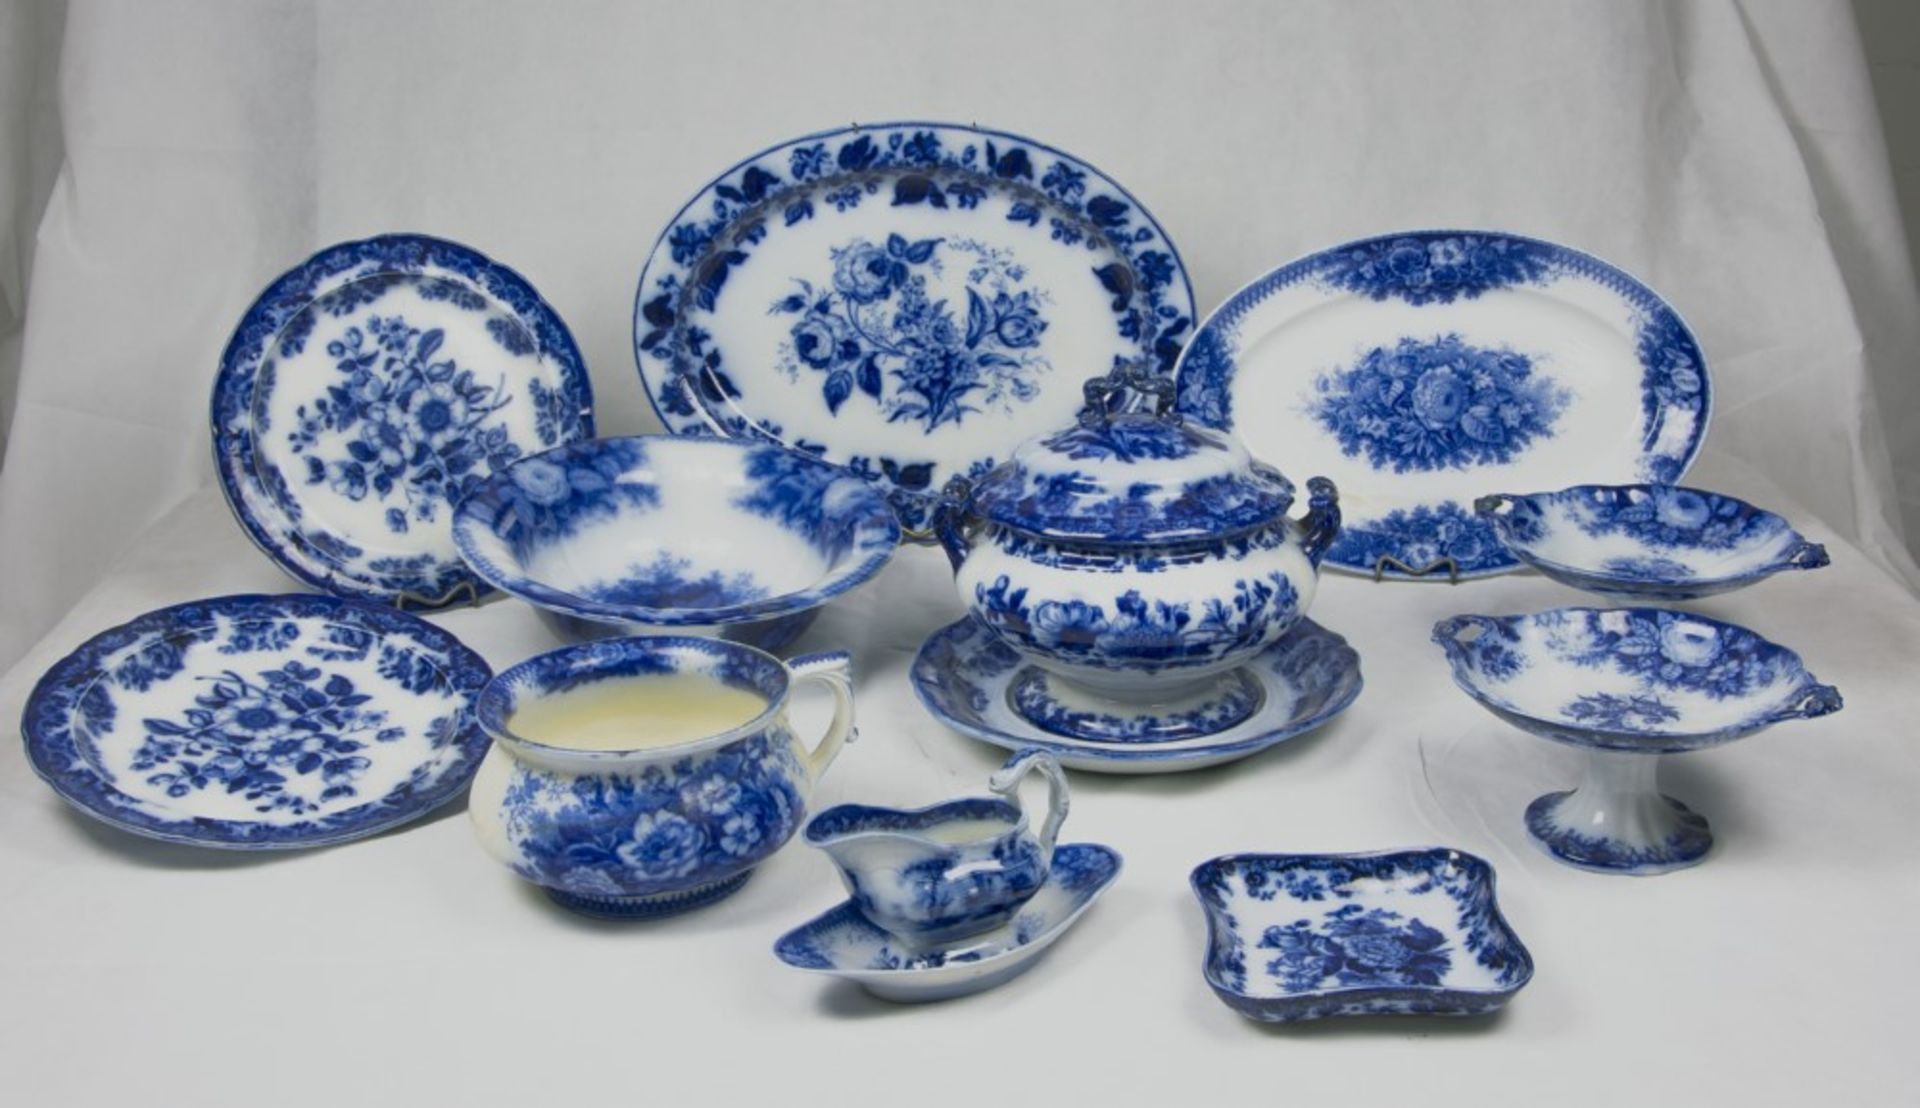 EARTHENWARE DISHES SET, FRANCE SARREGUMINES, LATE 19TH CENTURY White and blue enamel, with floral